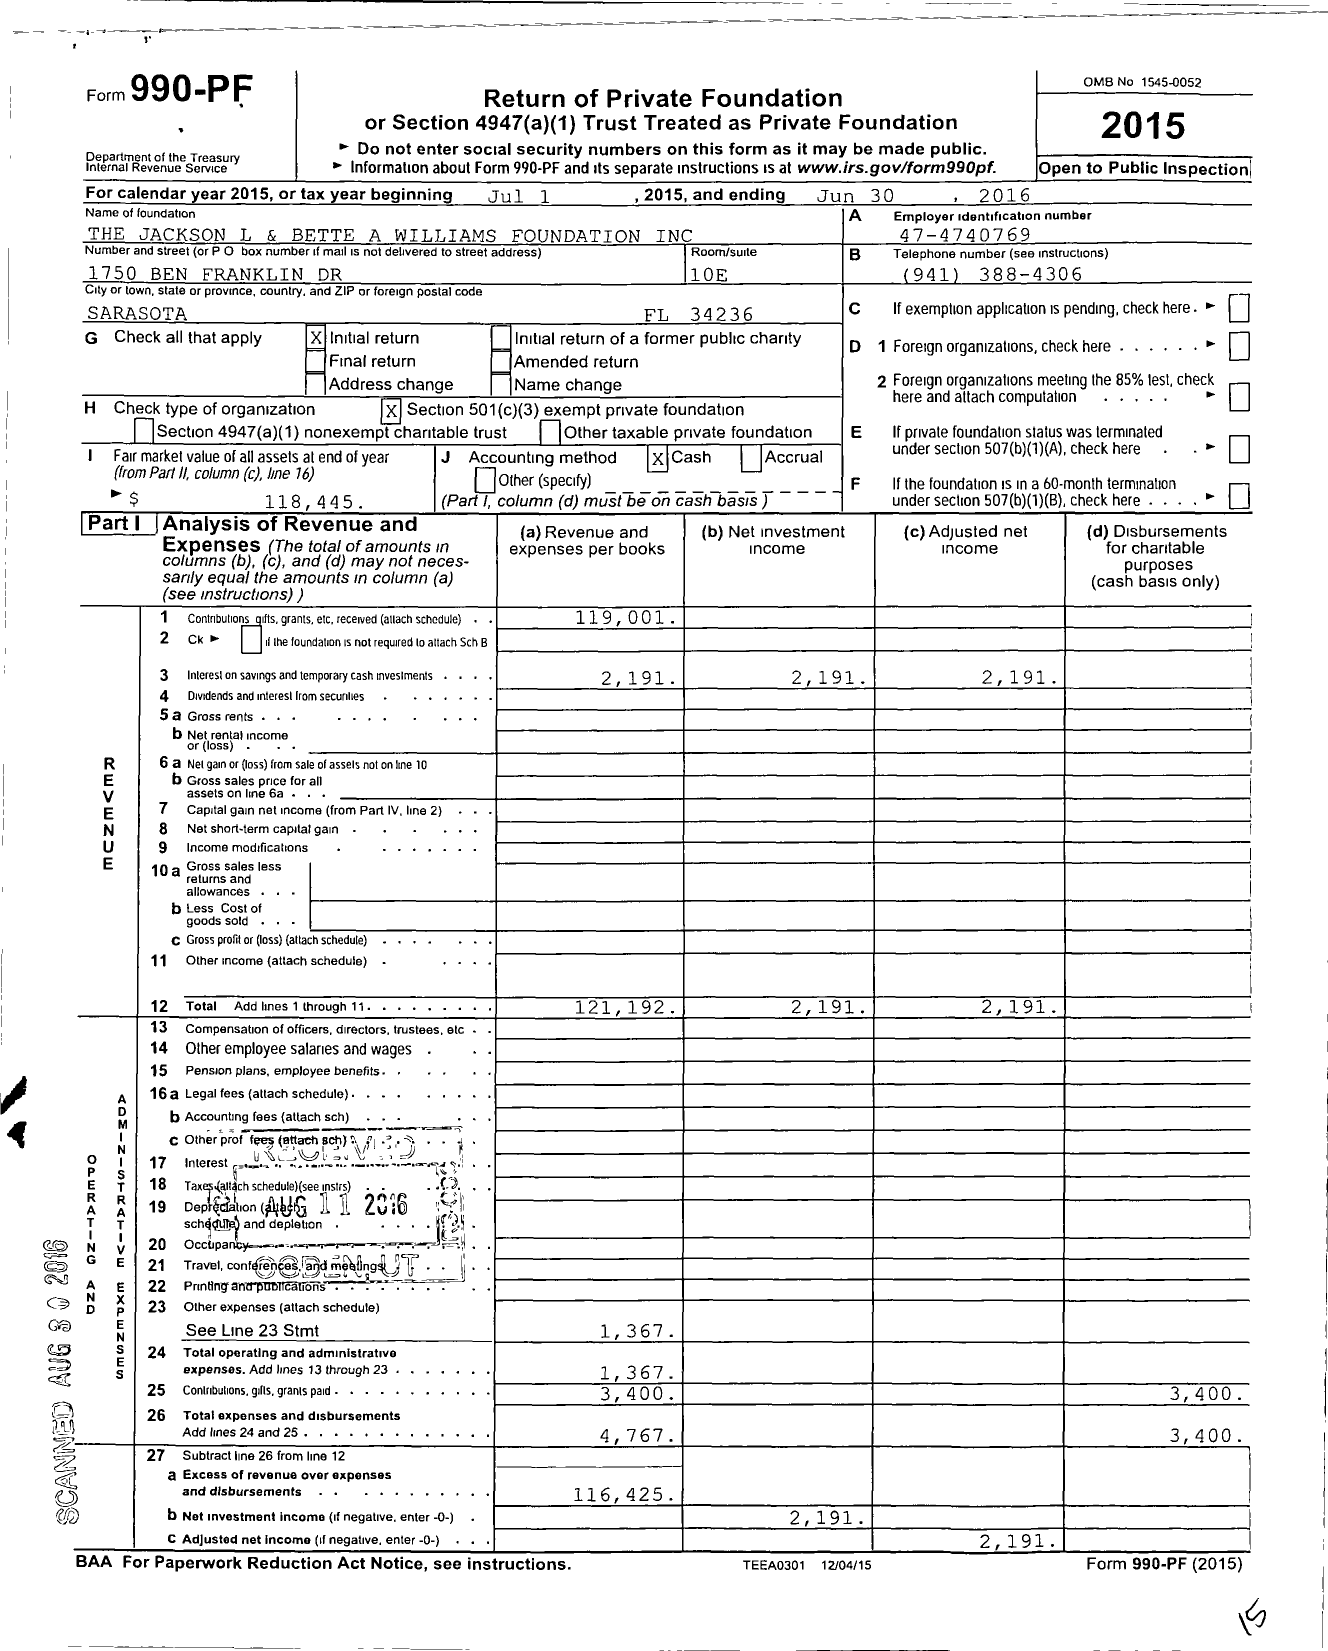 Image of first page of 2015 Form 990PF for The Jackson L and Bette A Williams Foundation